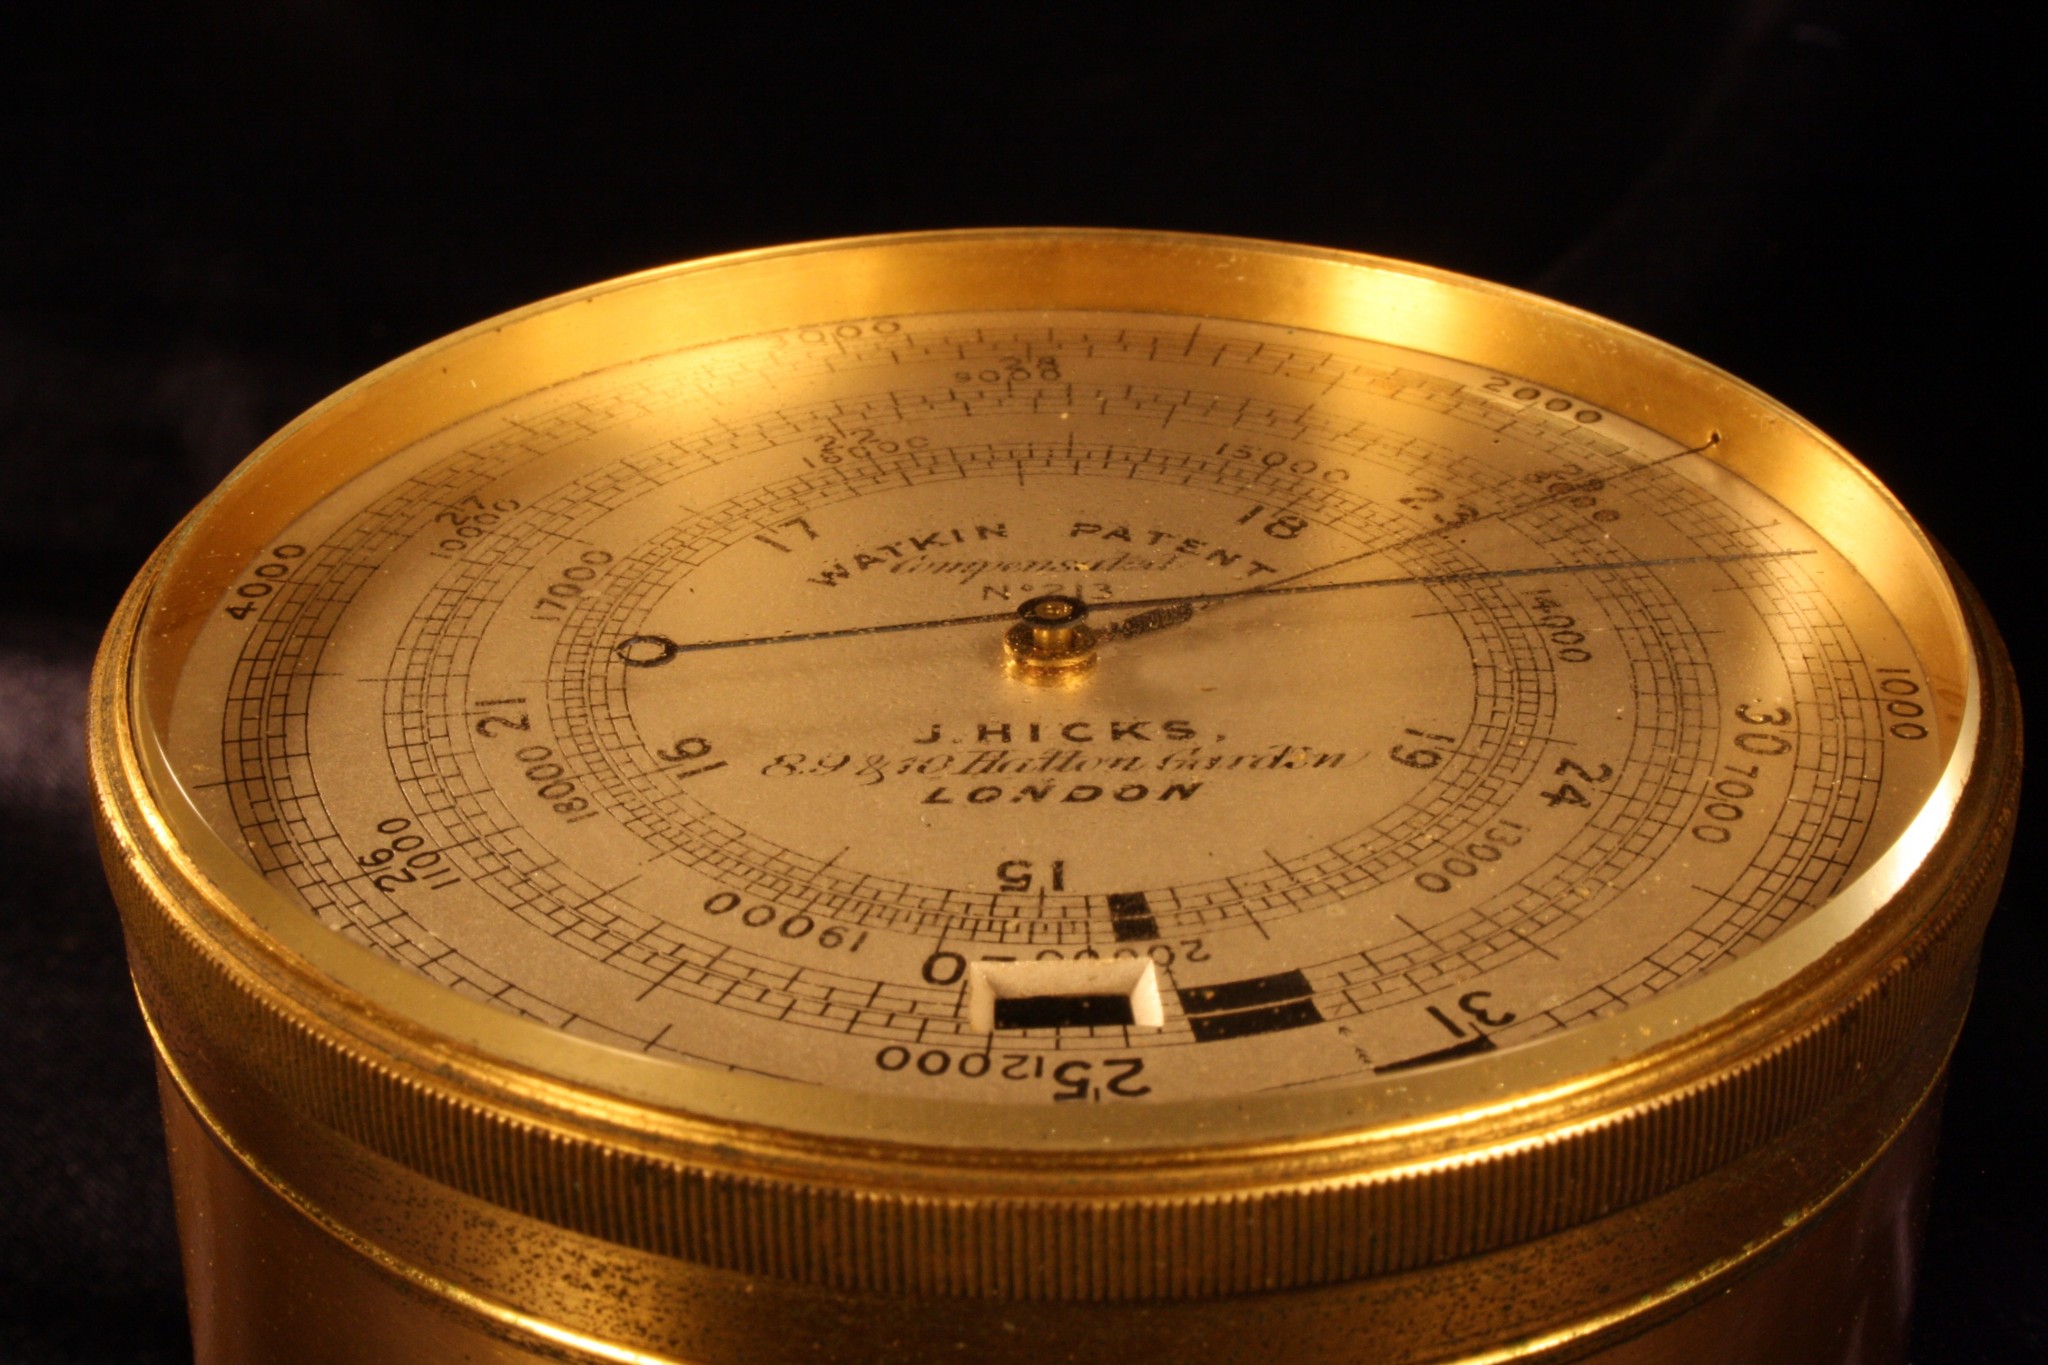 WATKIN PATENT EXTENDED SCALE BAROMETER ALTIMETER BY HICKS No 213 c1887